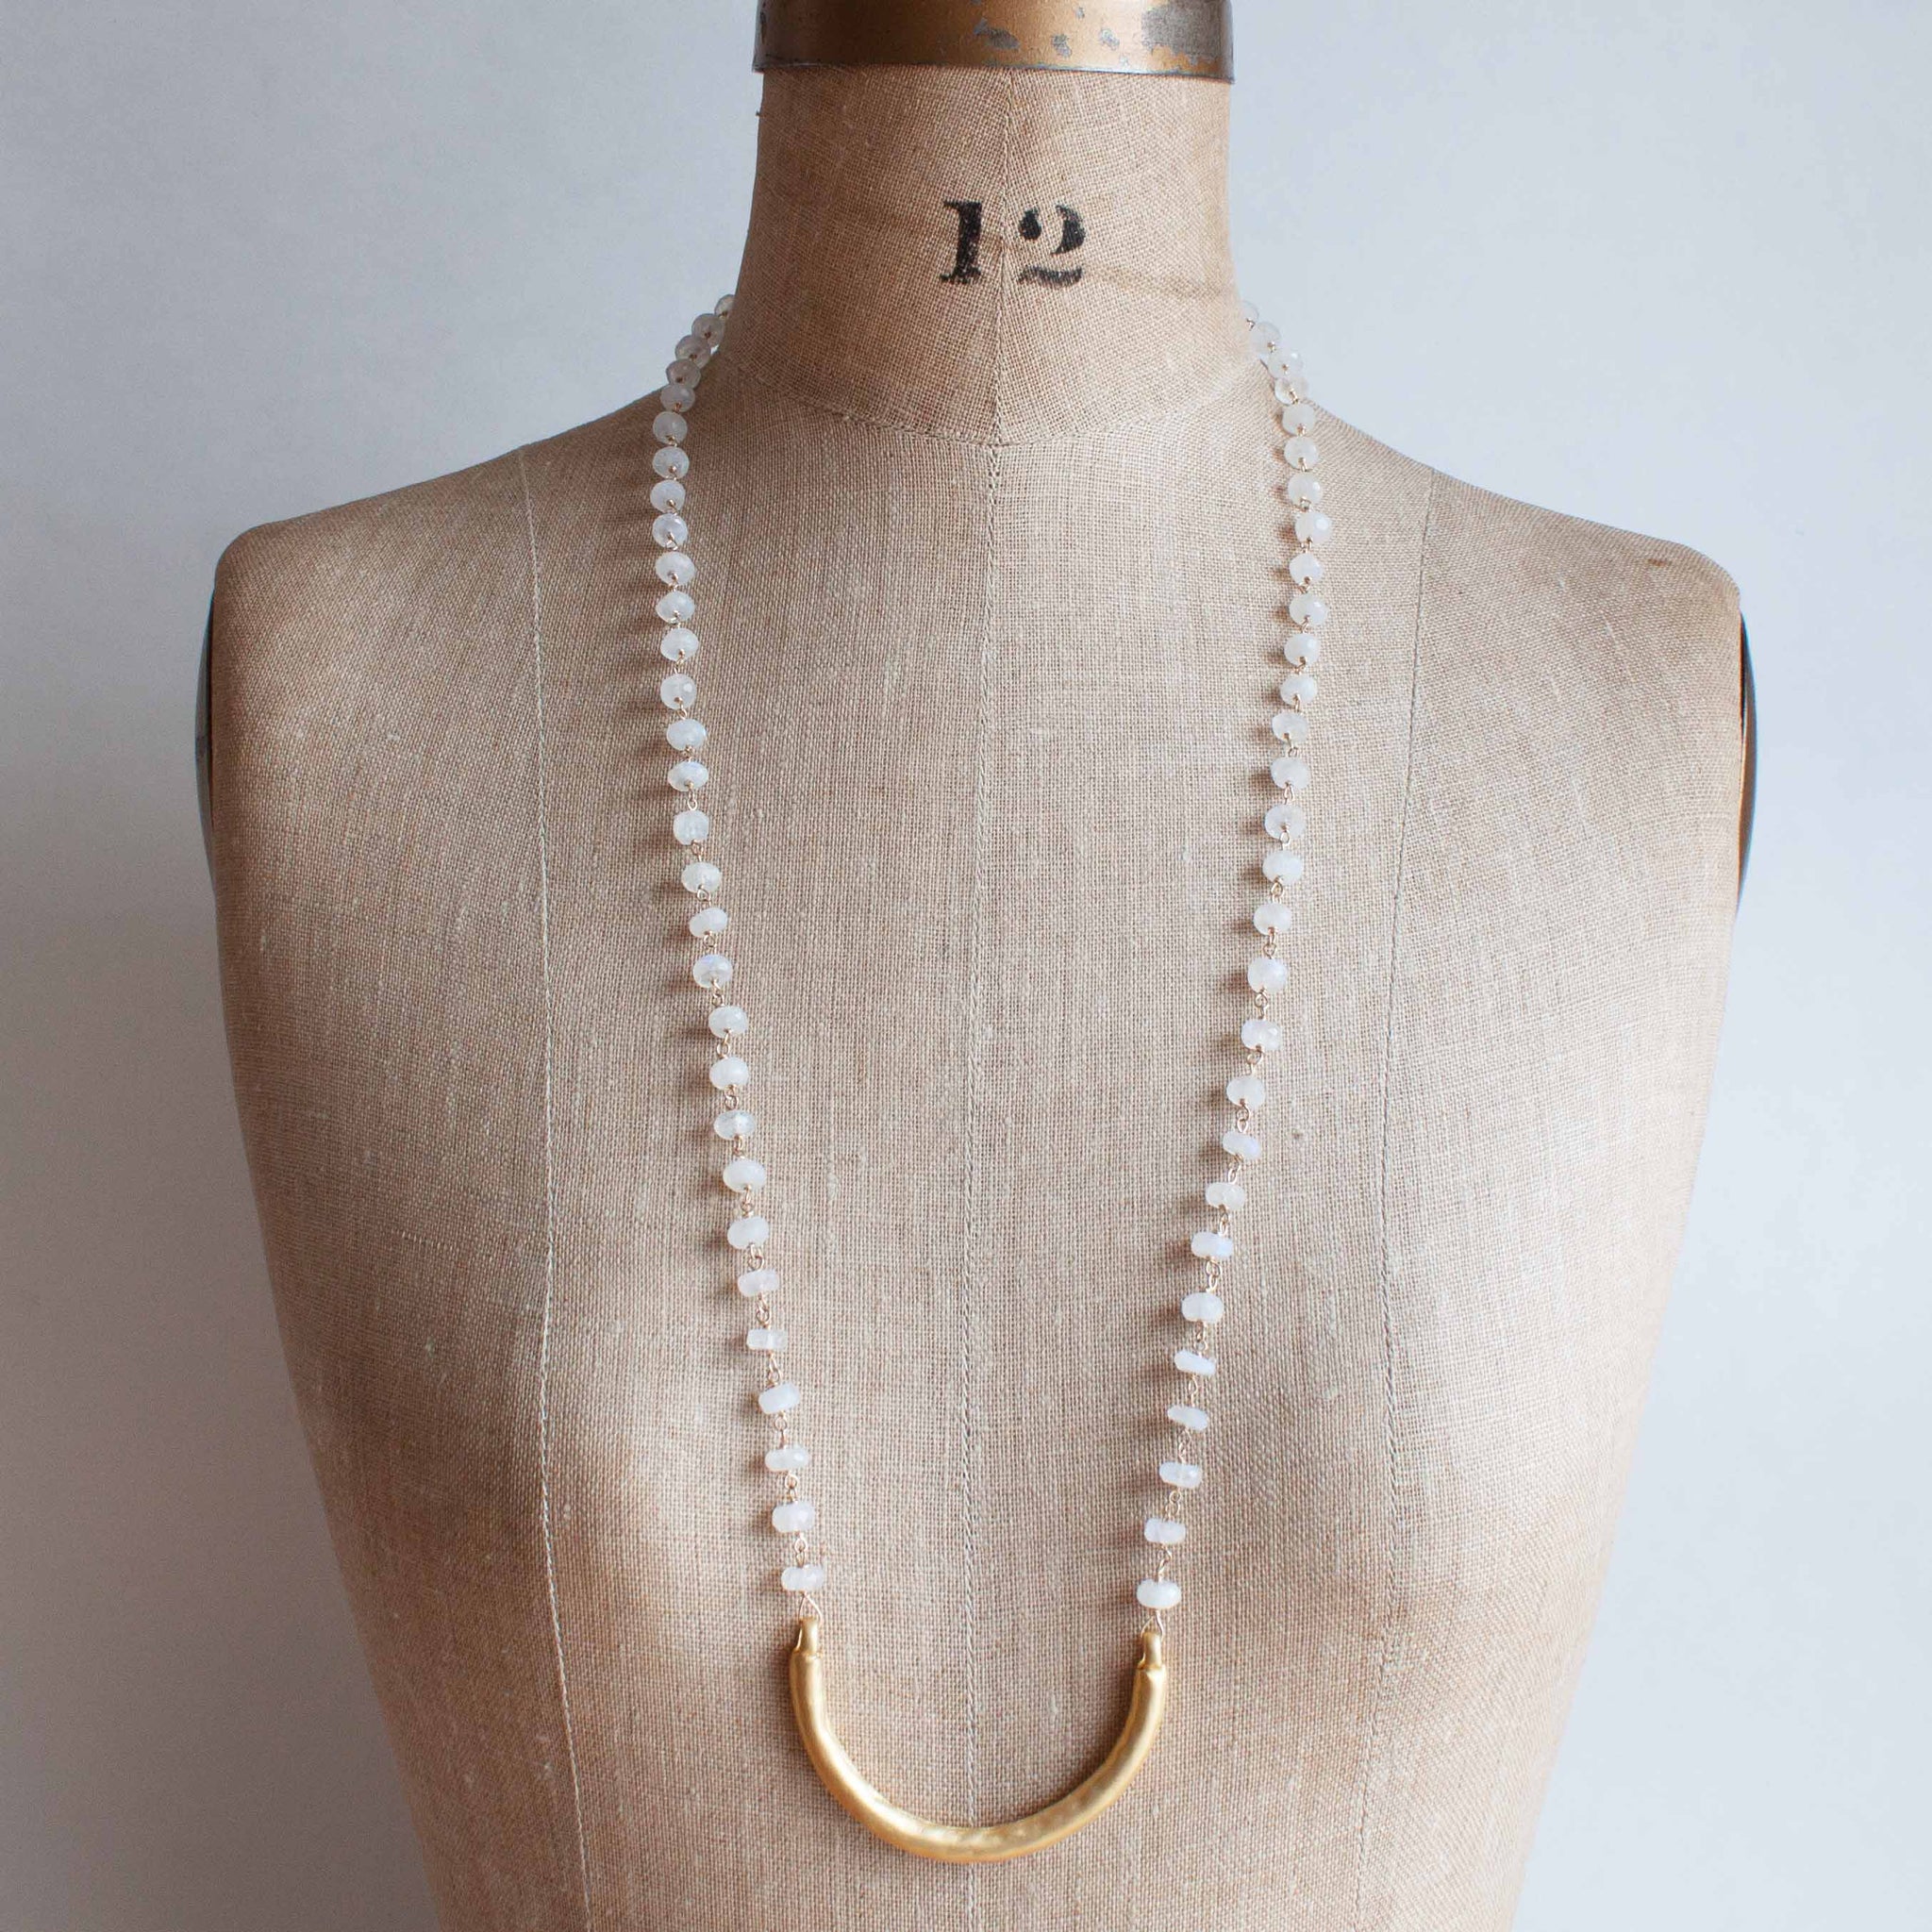 This delicate moonstone necklace ends perfectly with a well placed golden 'smile.' A versatile piece for wearing with your summer whites or winter greys. 30 inch necklace with gold wire wrapped faceted moonstone beads and gold vermeil pendant. Handmade in Toronto by kp jewelry co.